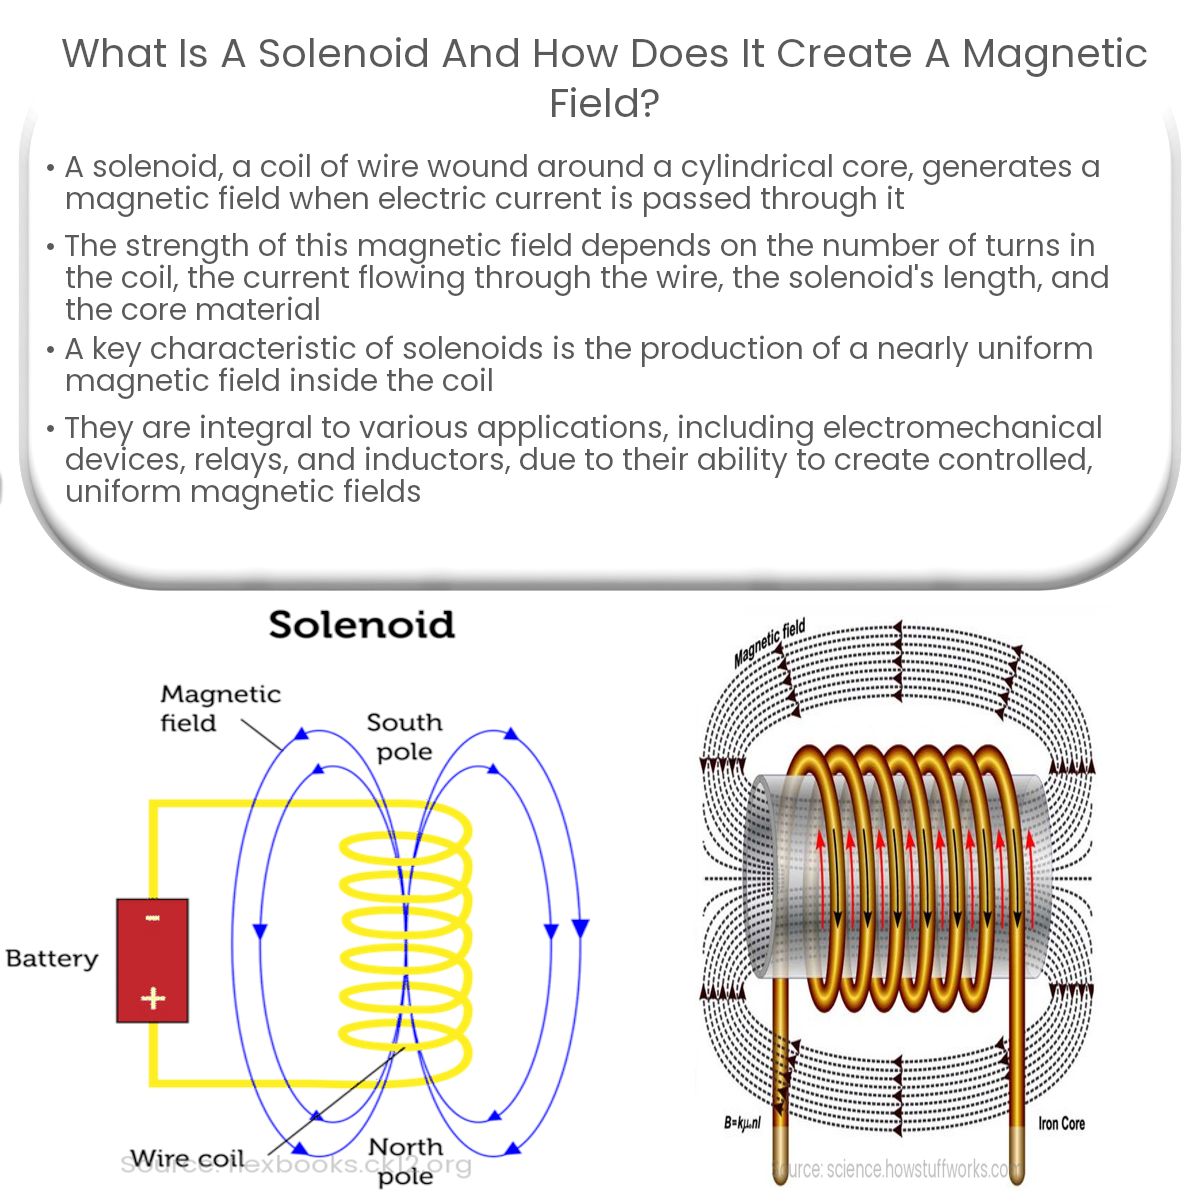 https://www.electricity-magnetism.org/wp-content/uploads/2023/06/what-is-a-solenoid-and-how-does-it-create-a-magnetic-field.png